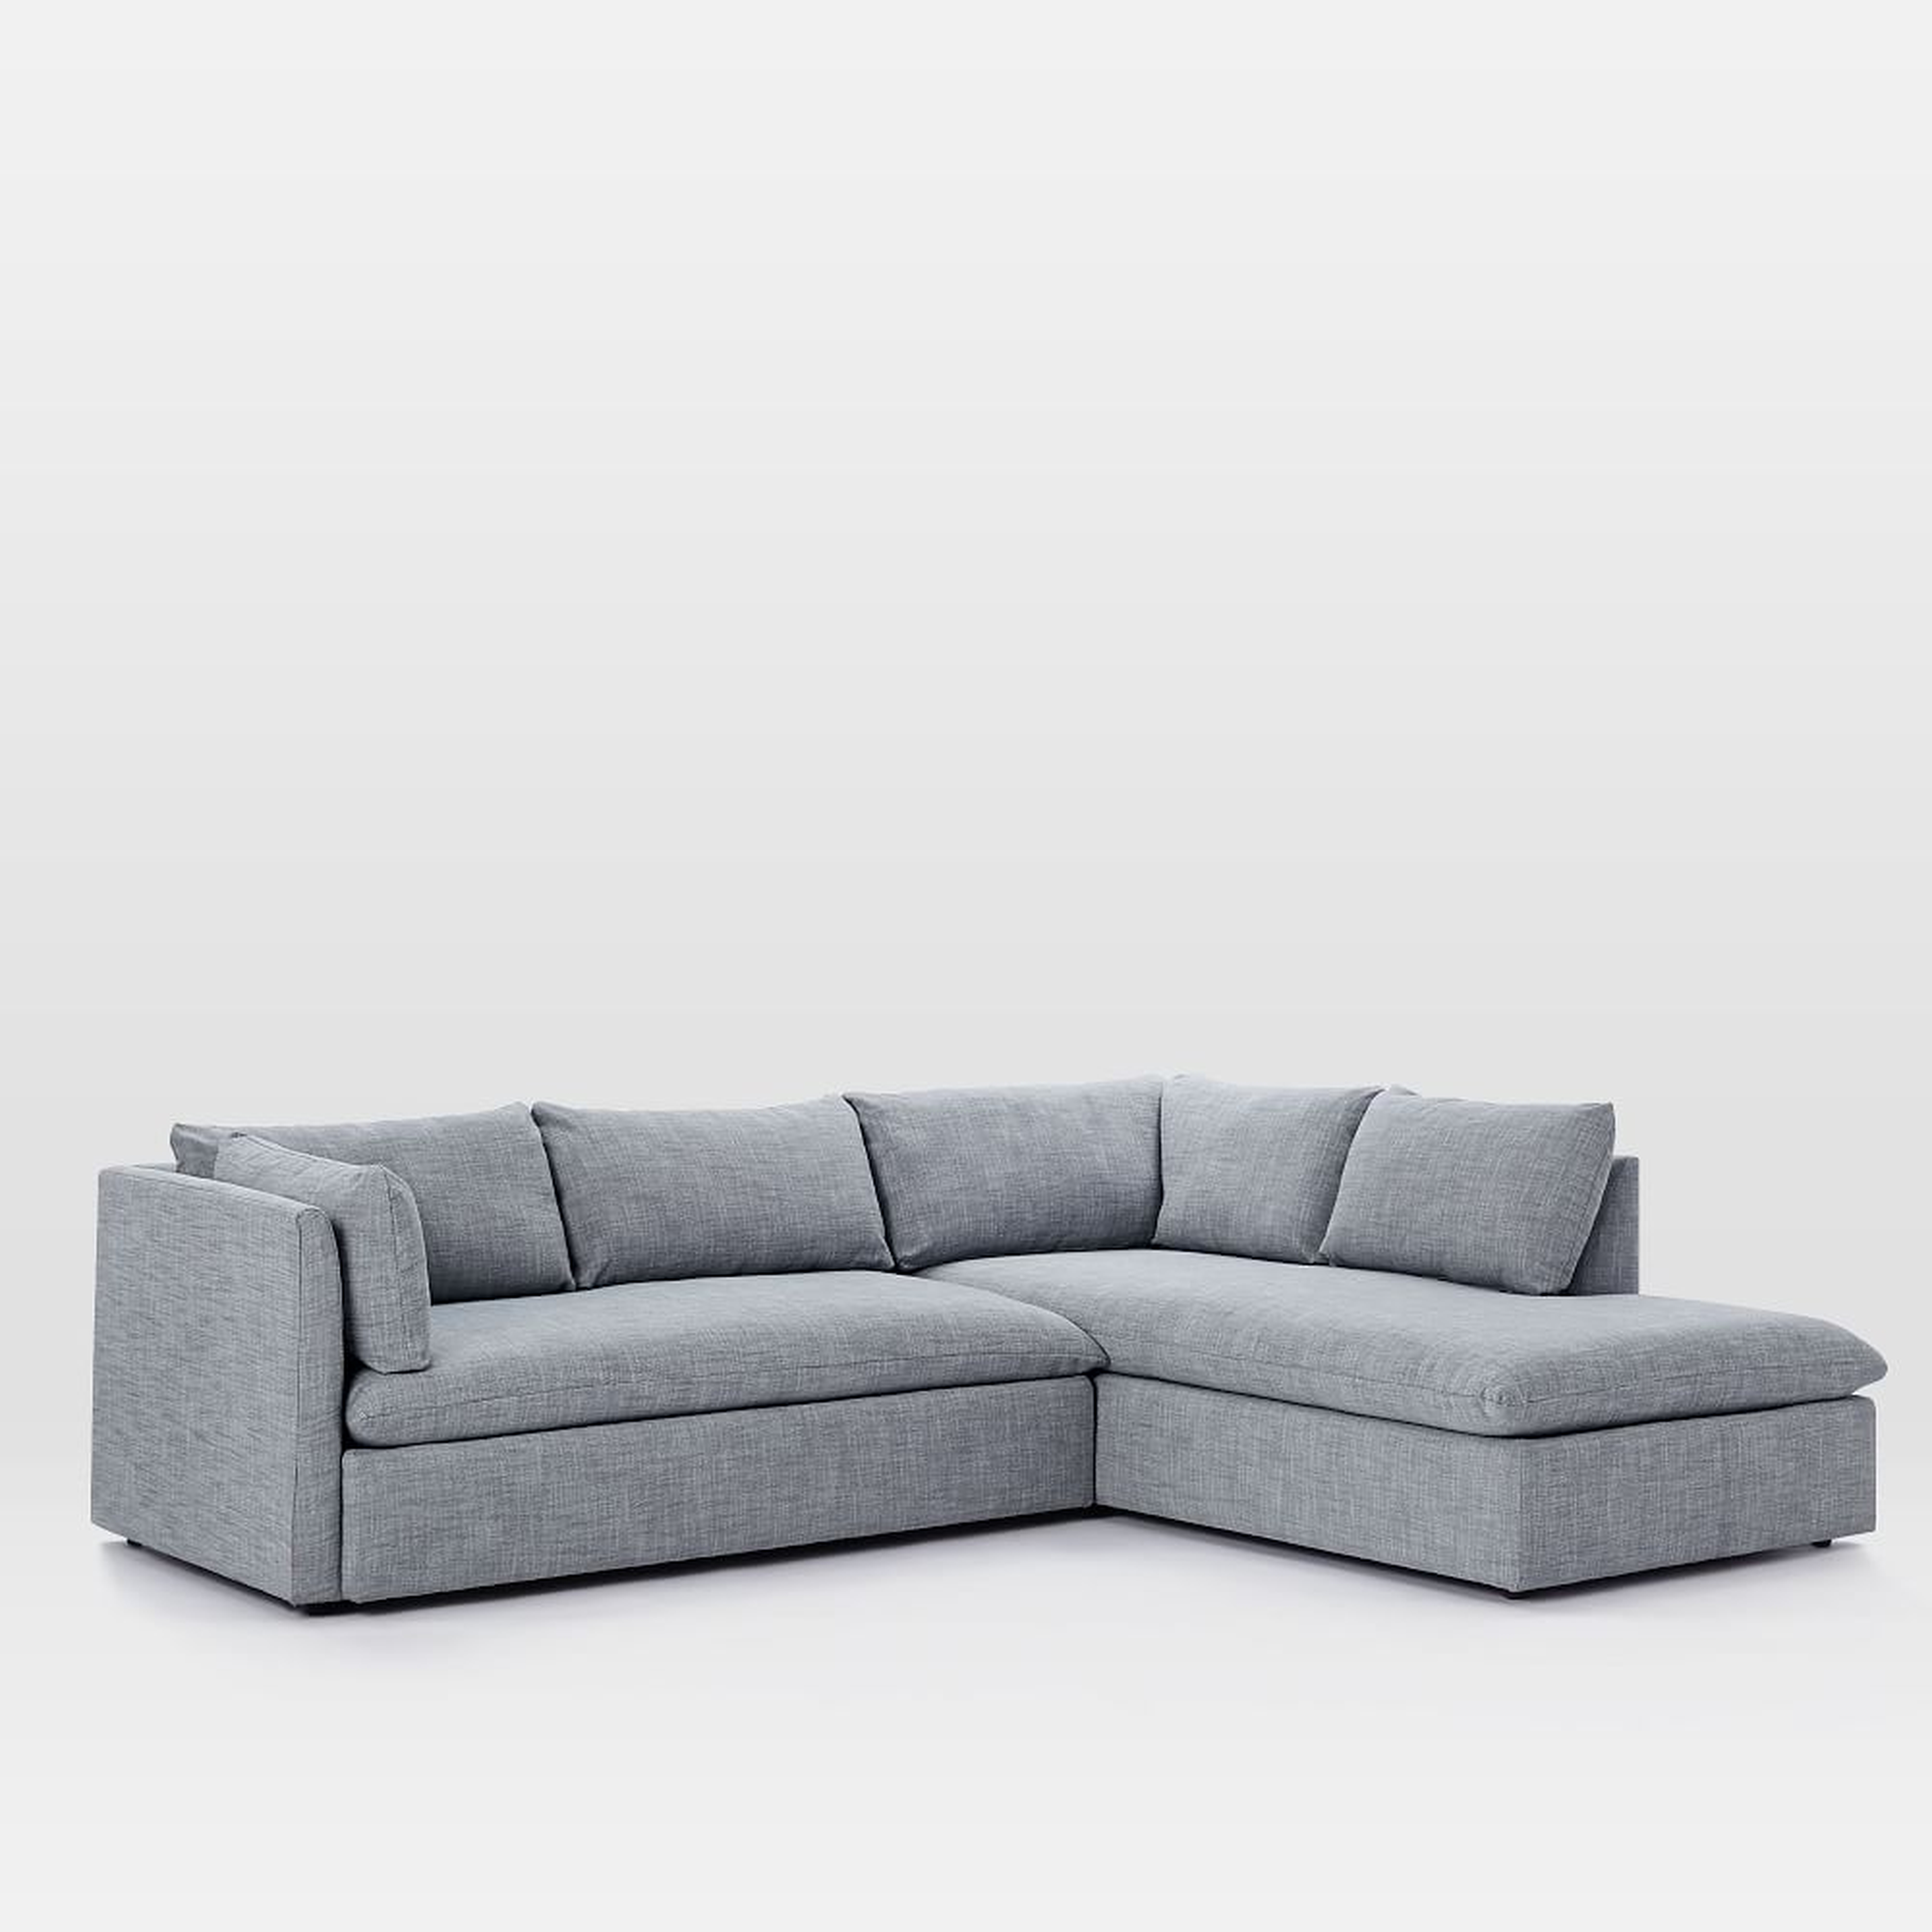 Shelter 106" Right 2-Piece Bumper Chaise Sectional, Yarn Dyed Linen Weave, graphite - West Elm